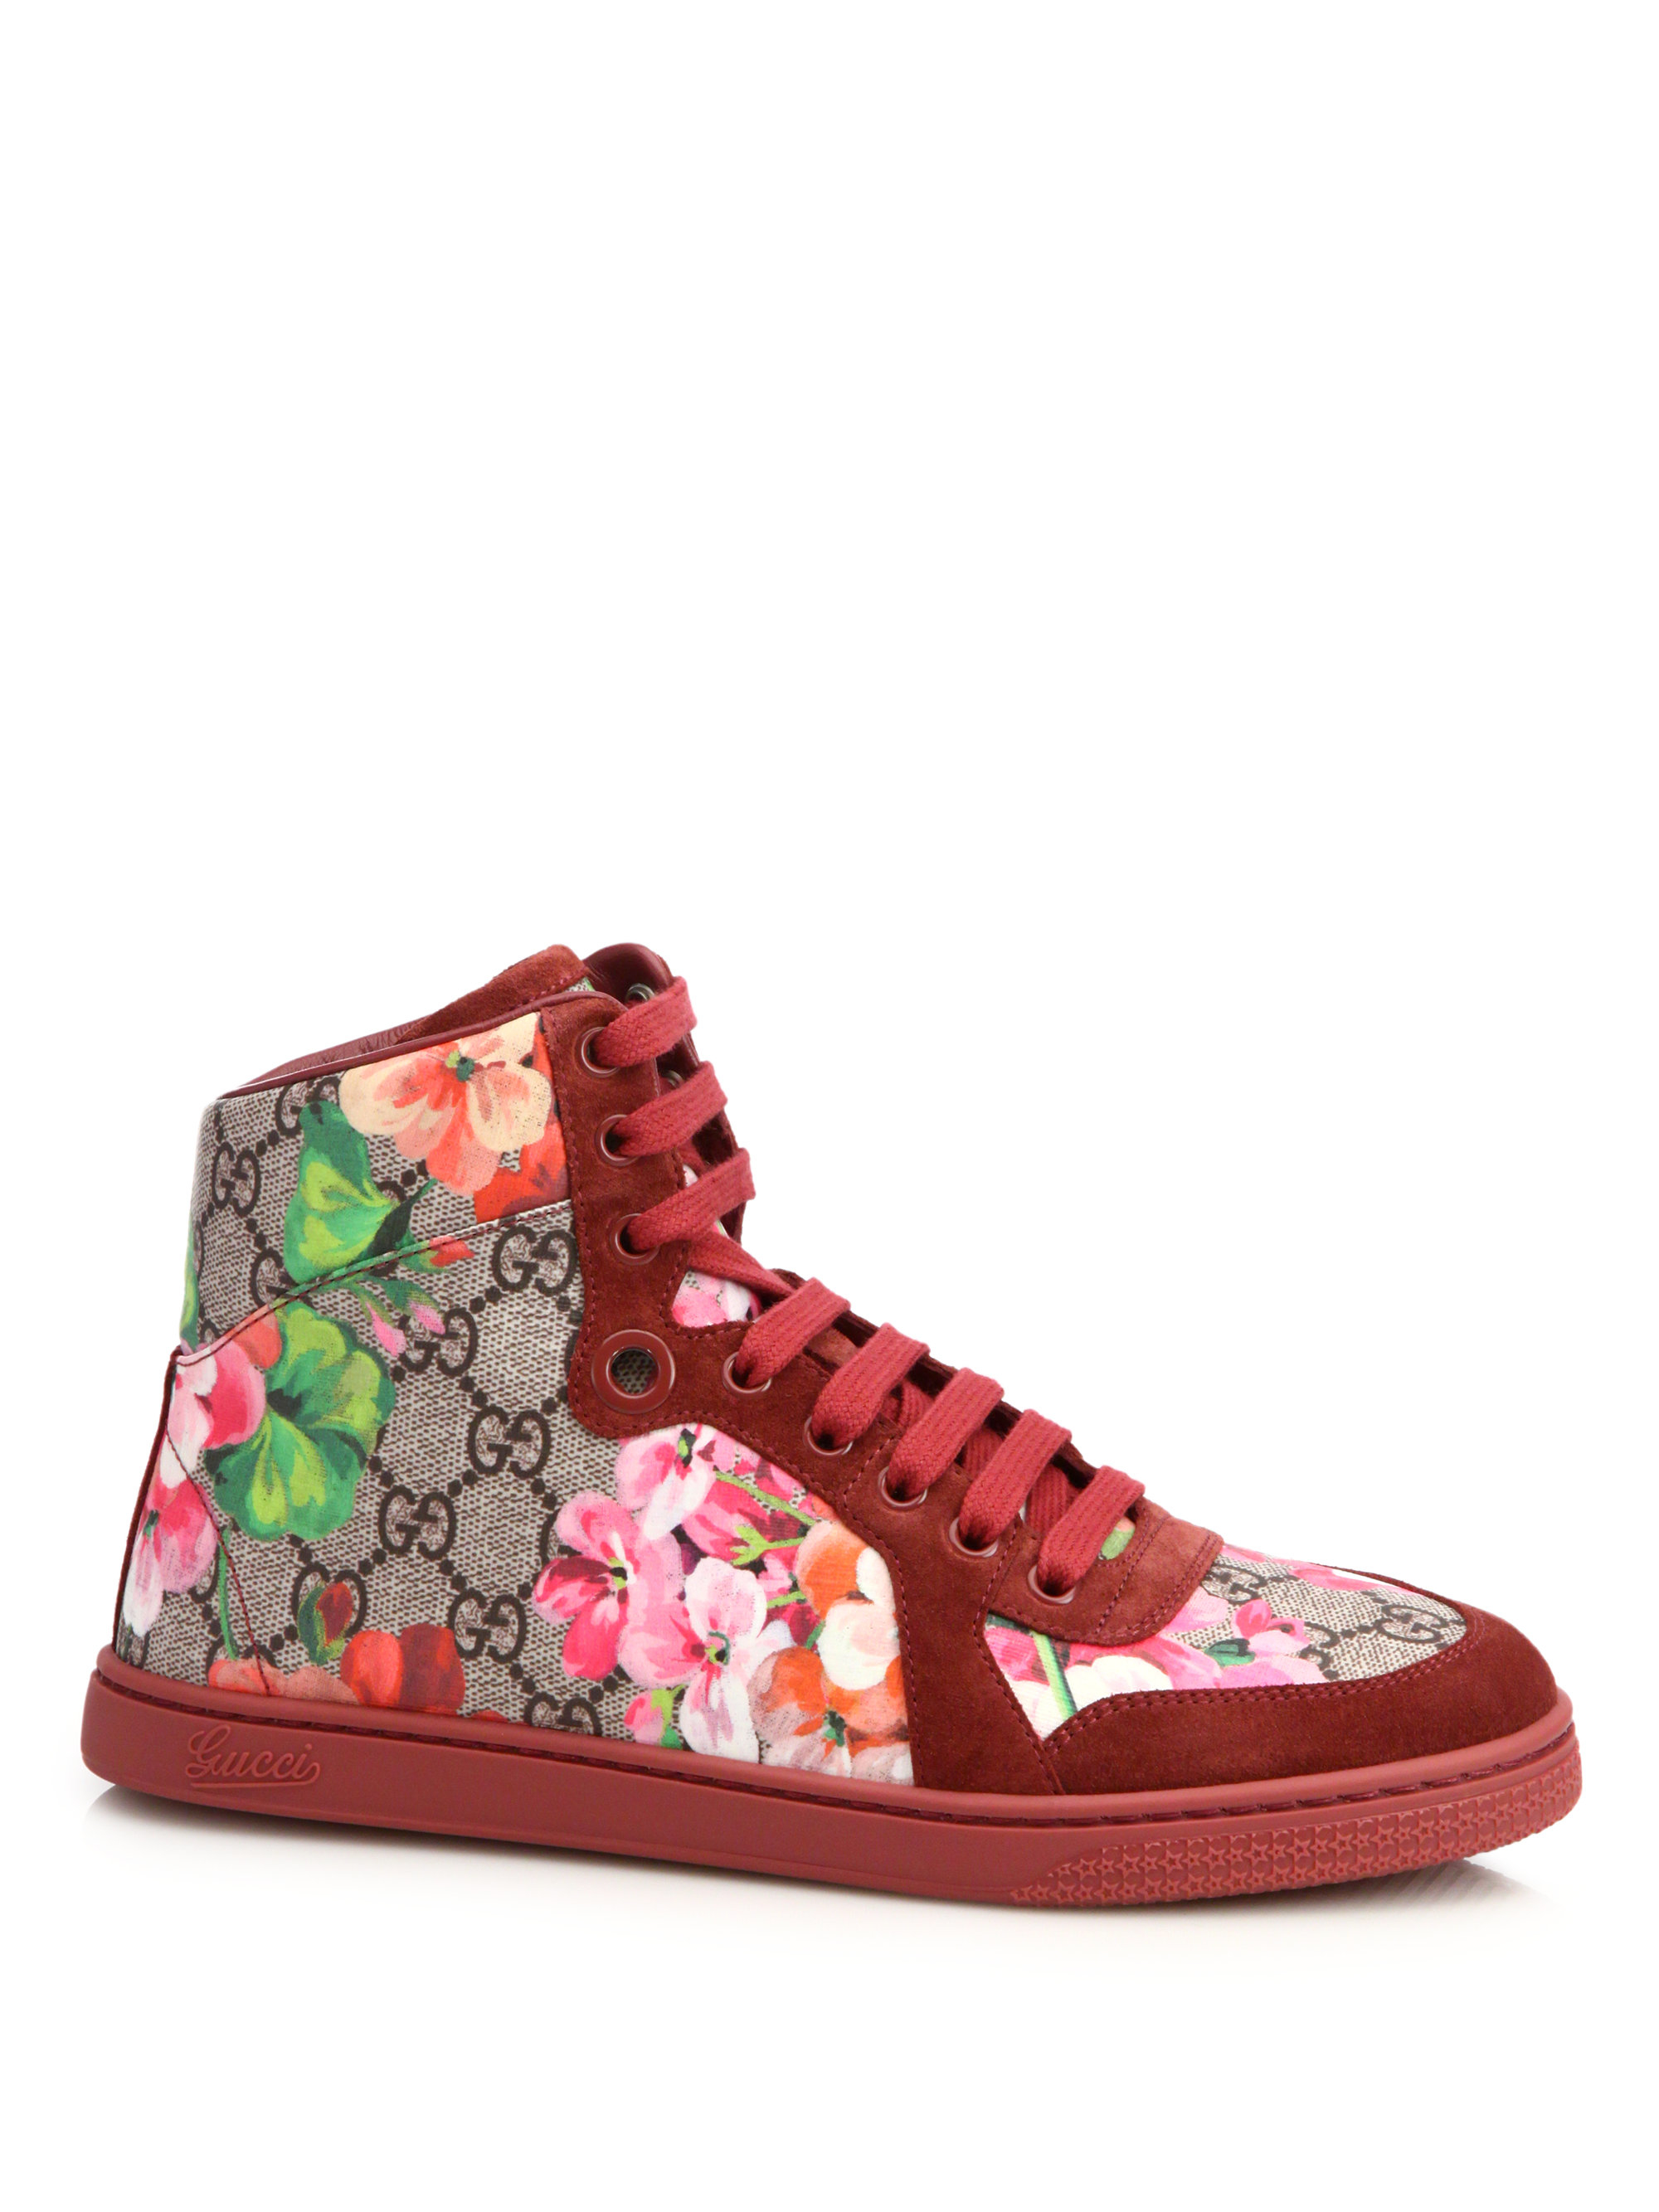 Gucci Marine Floral-print Canvas & Suede Sneakers for Men - Lyst